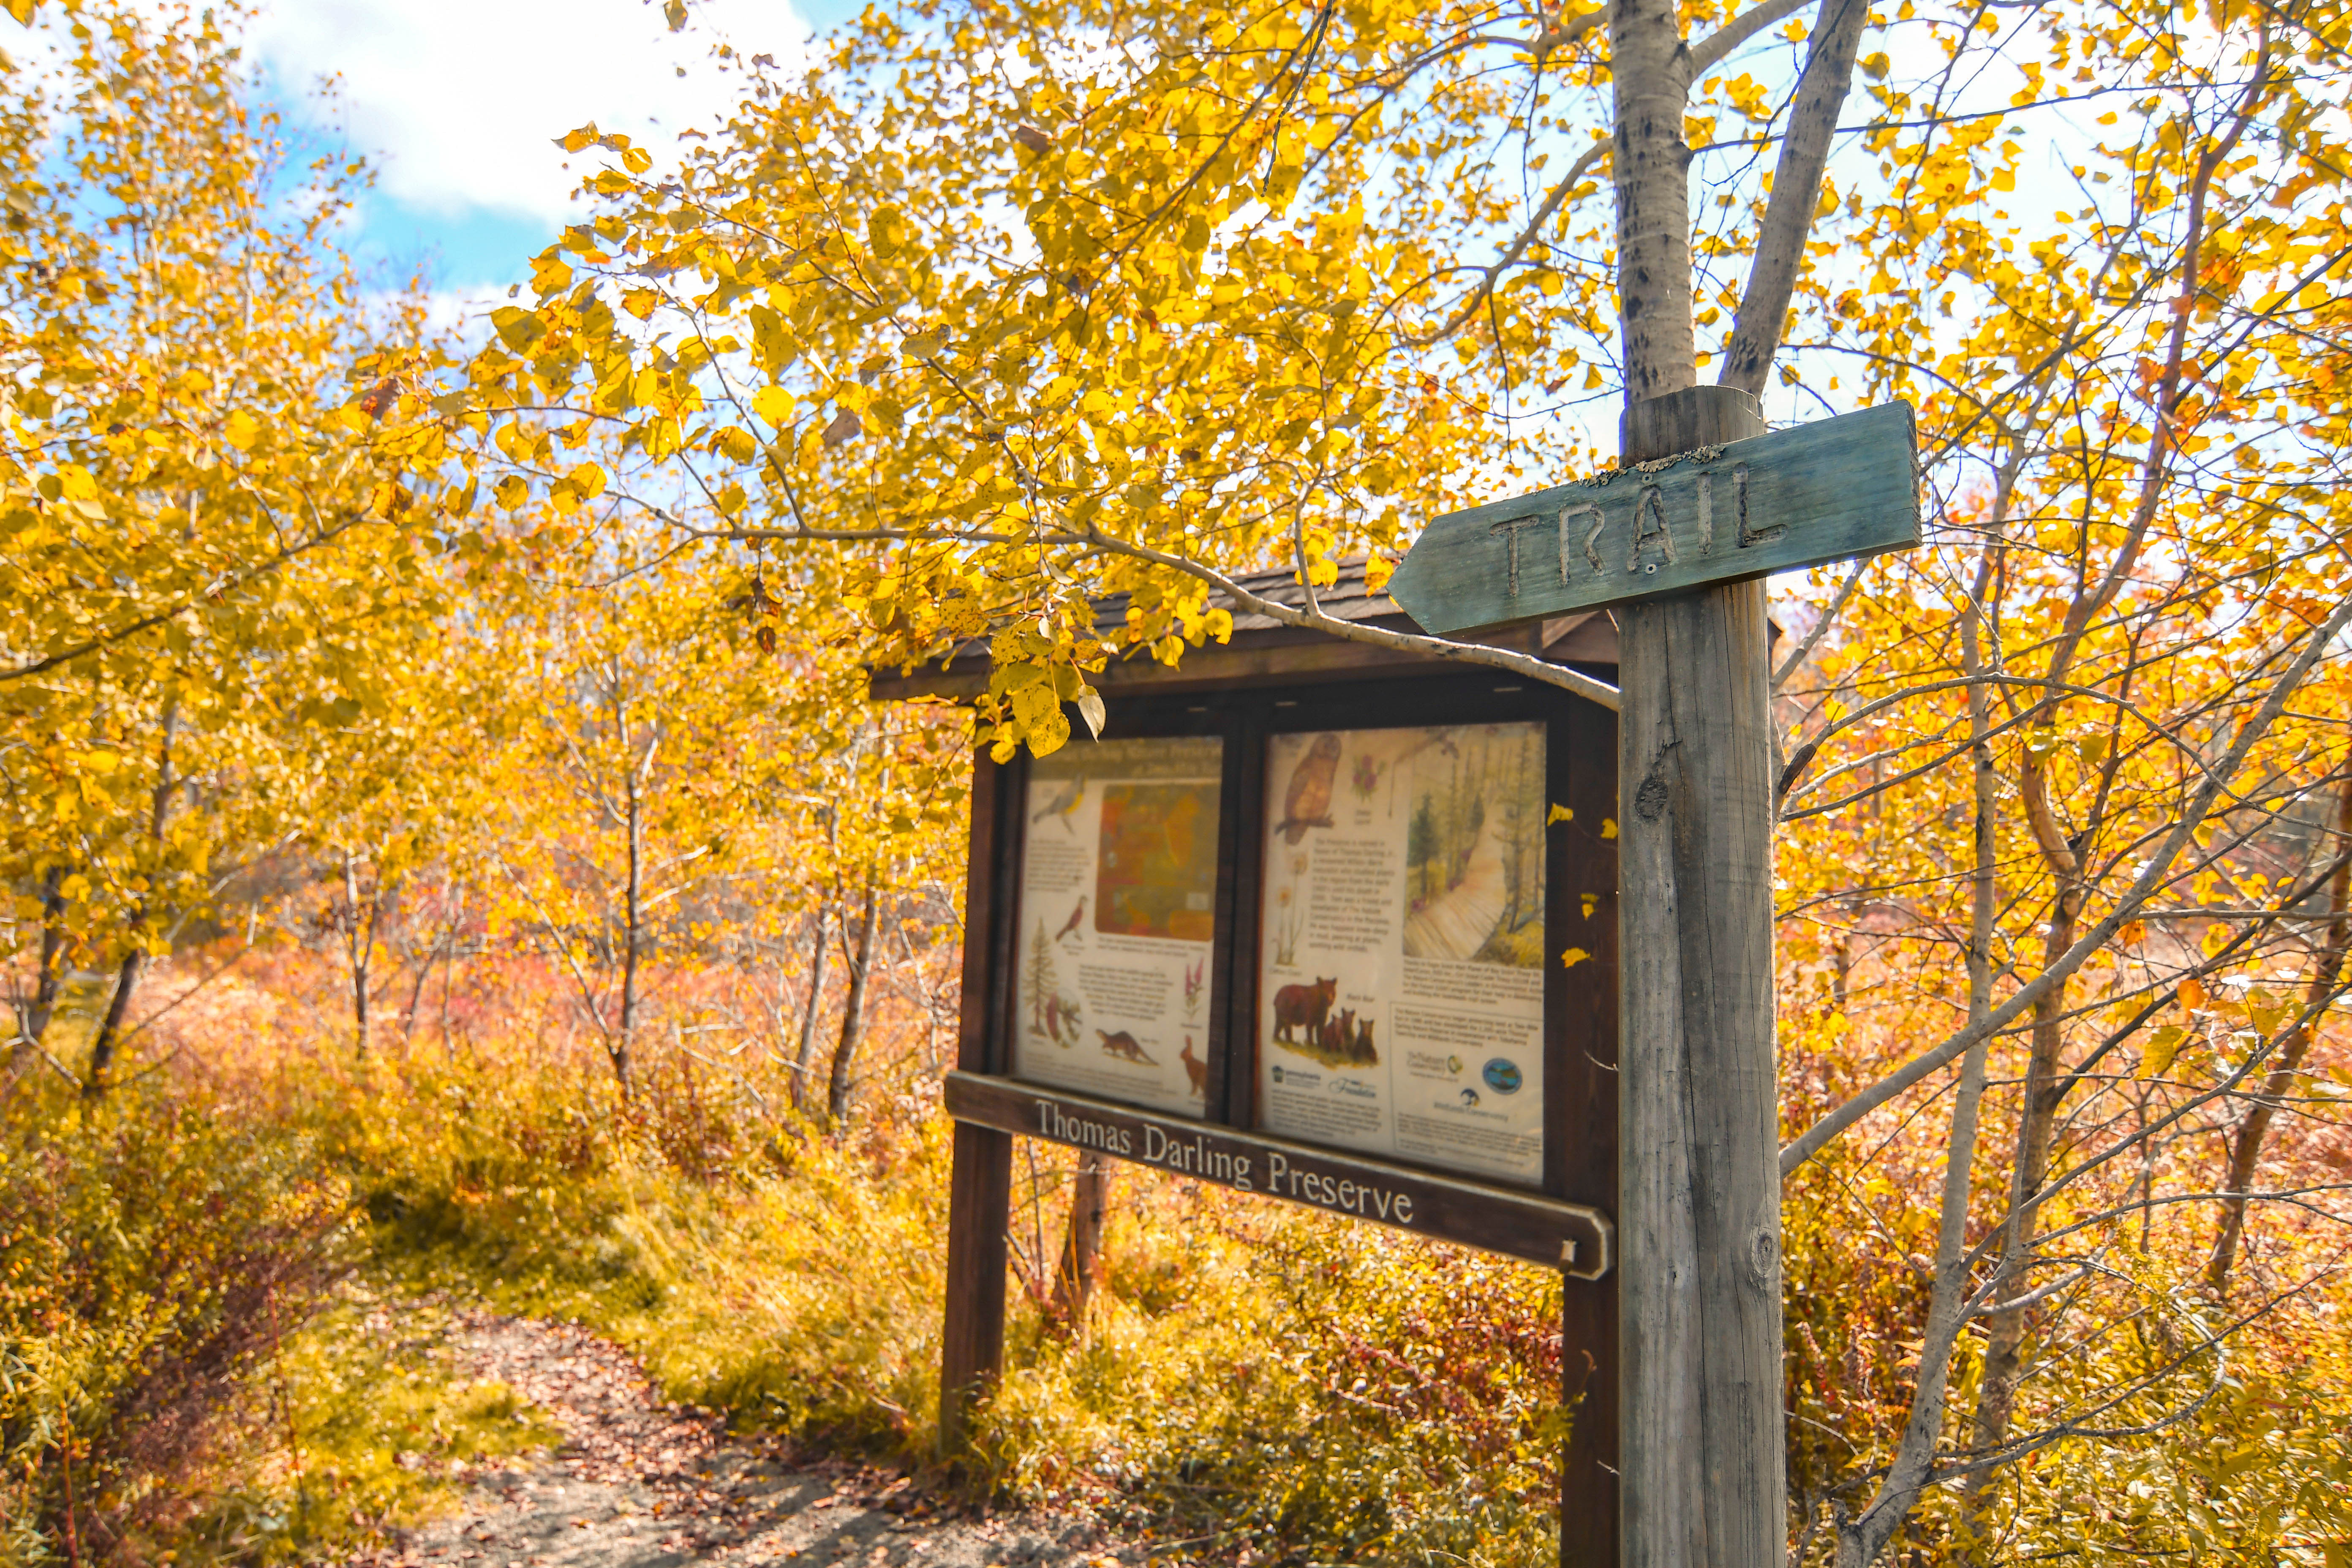 A wooden kisok sits at a trail entracne agasint fall colored trees with yellow leaves.